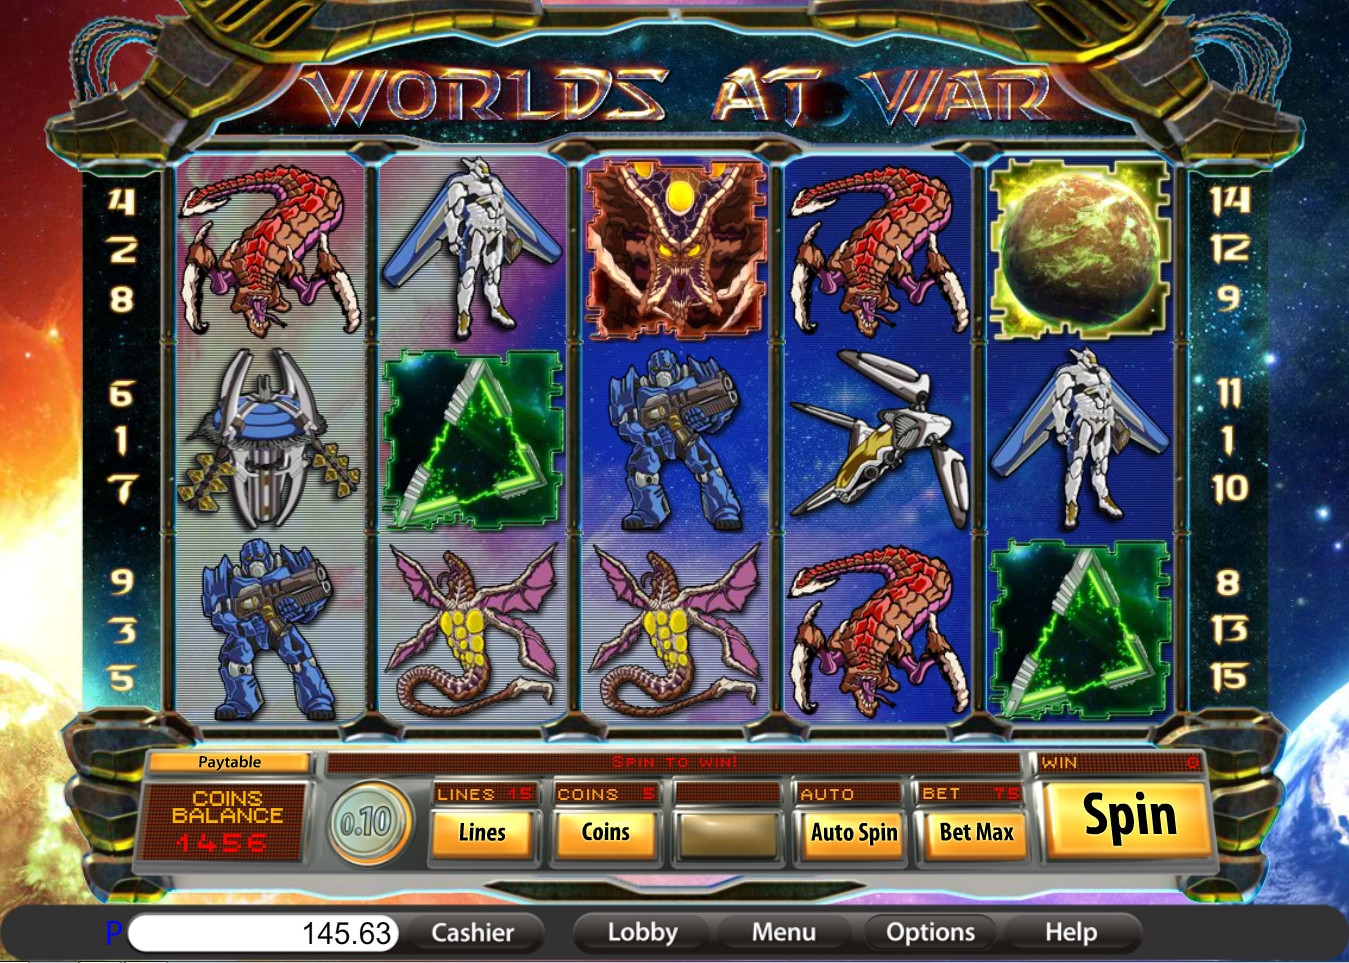 Worlds at War (Worlds at War) from category Slots